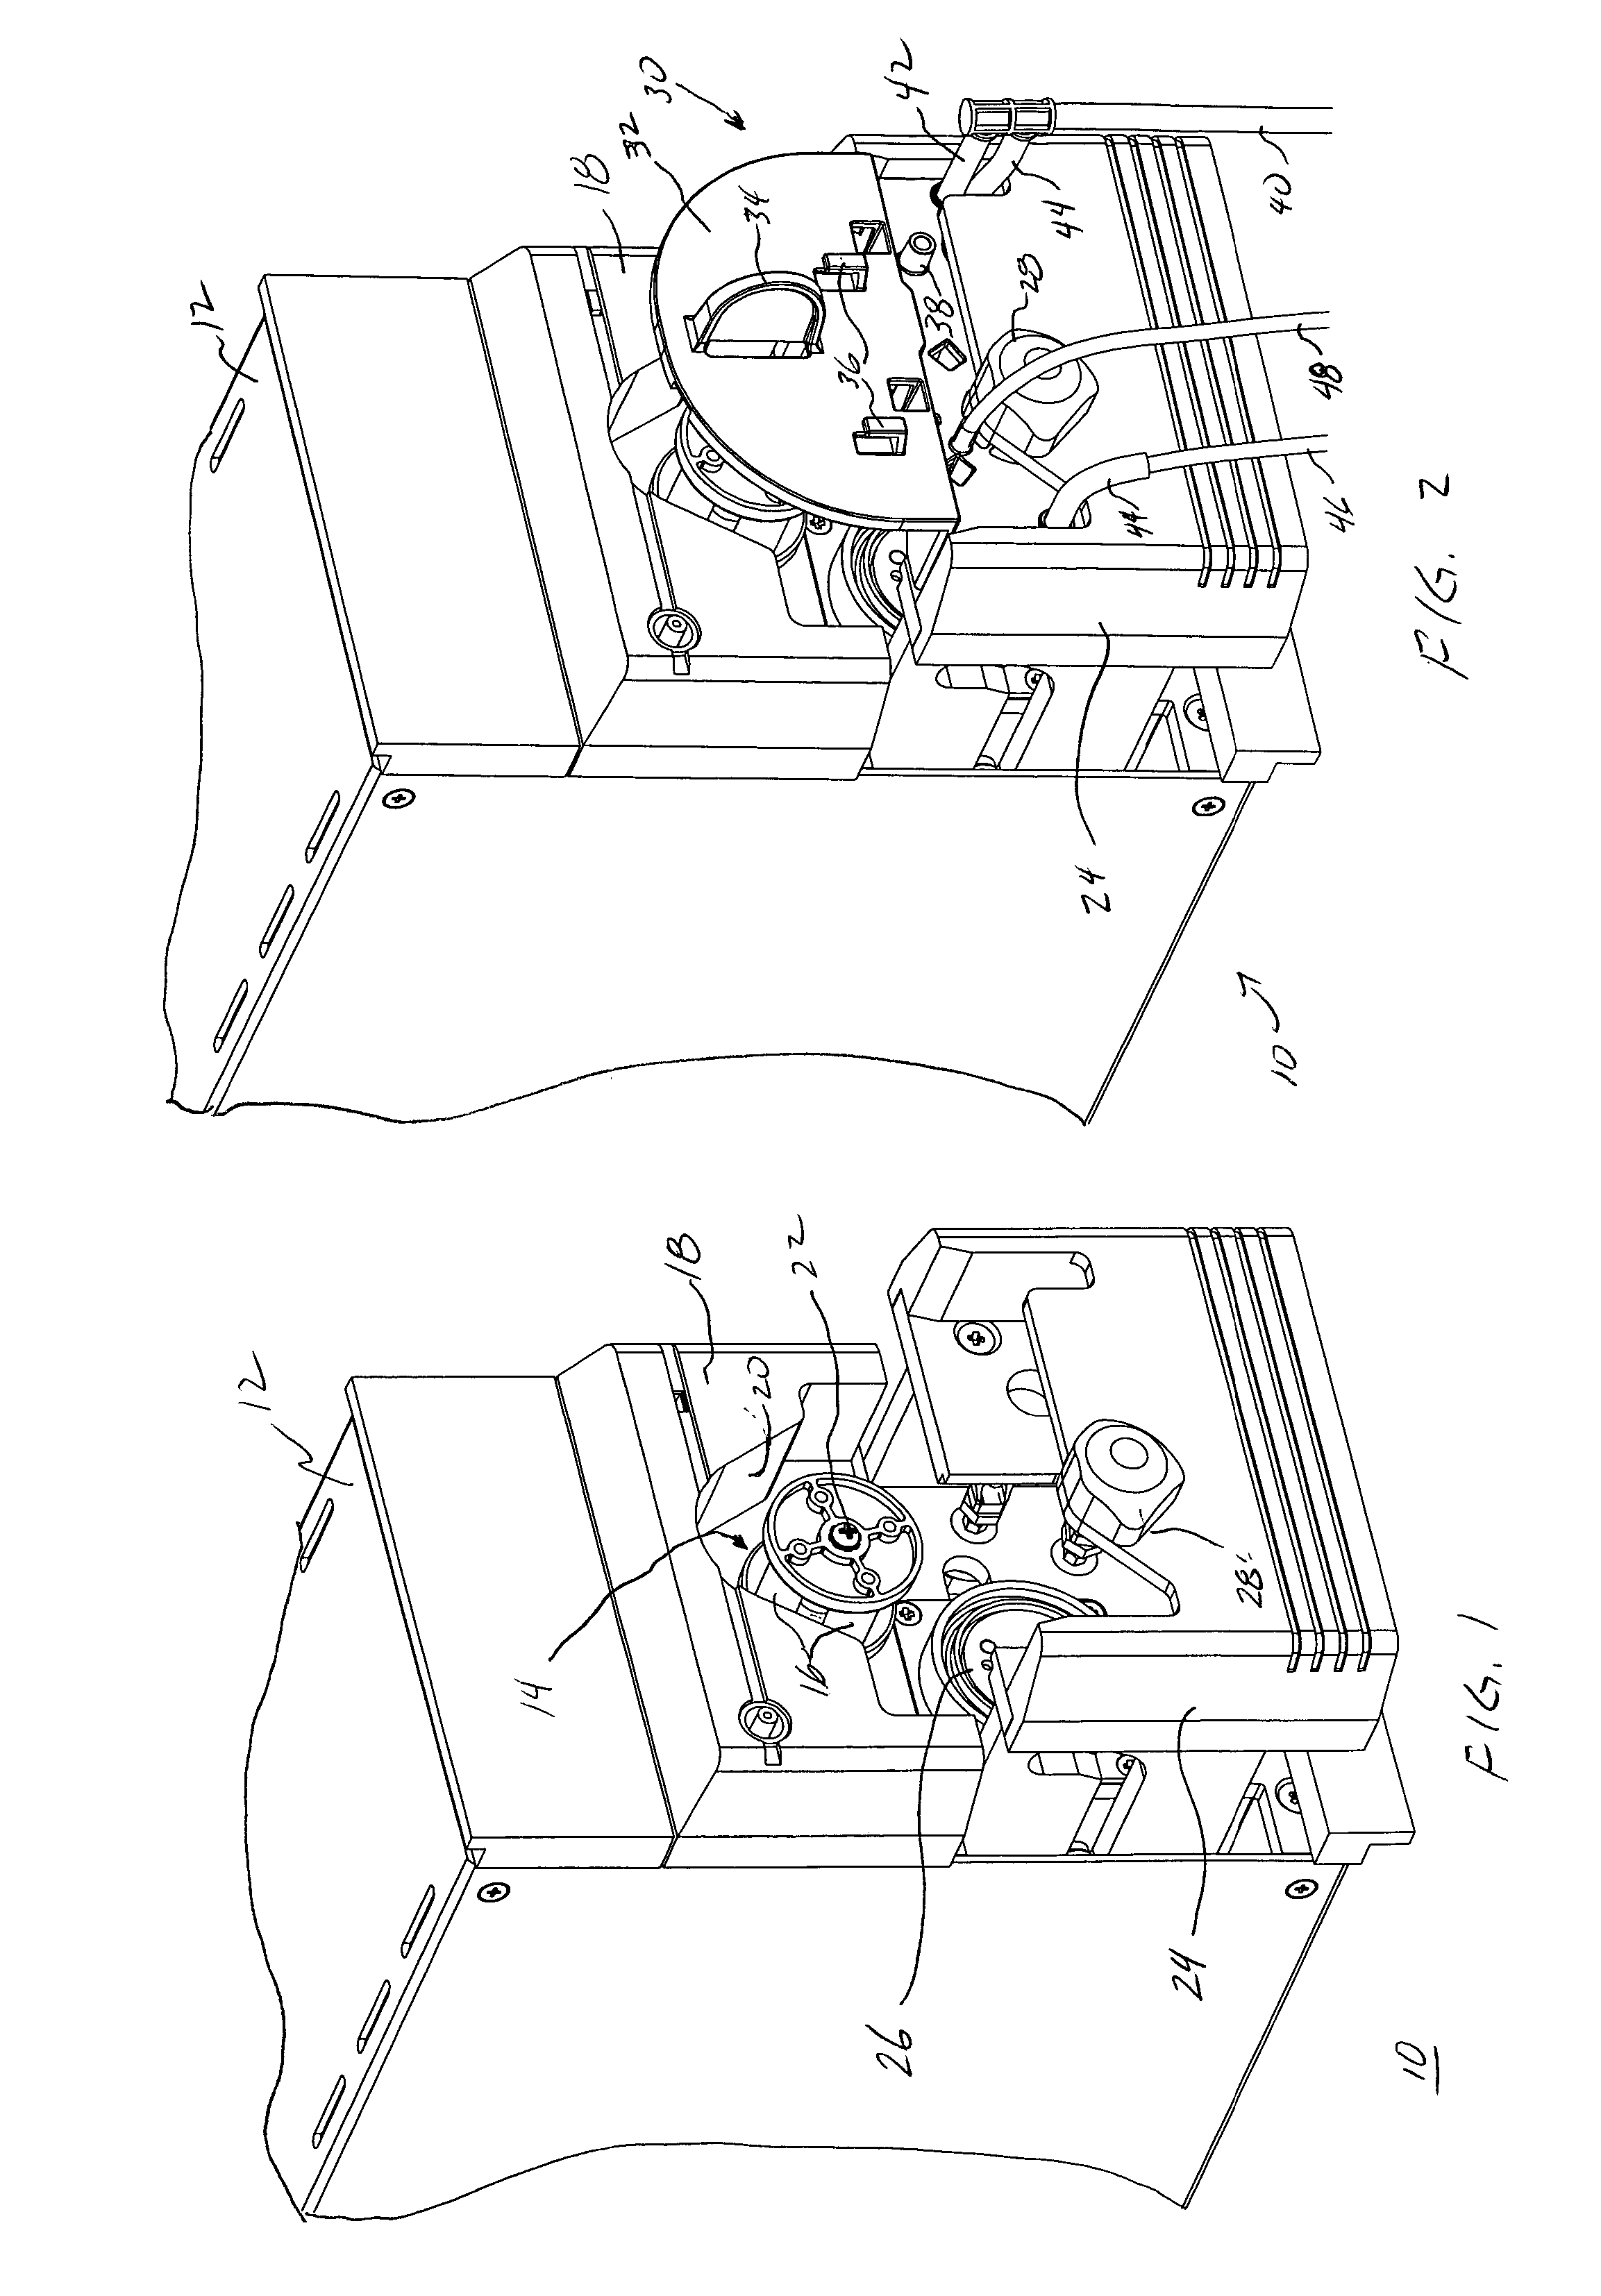 Peristaltic pump with air venting via the movement of a pump head or a backing plate during surgery